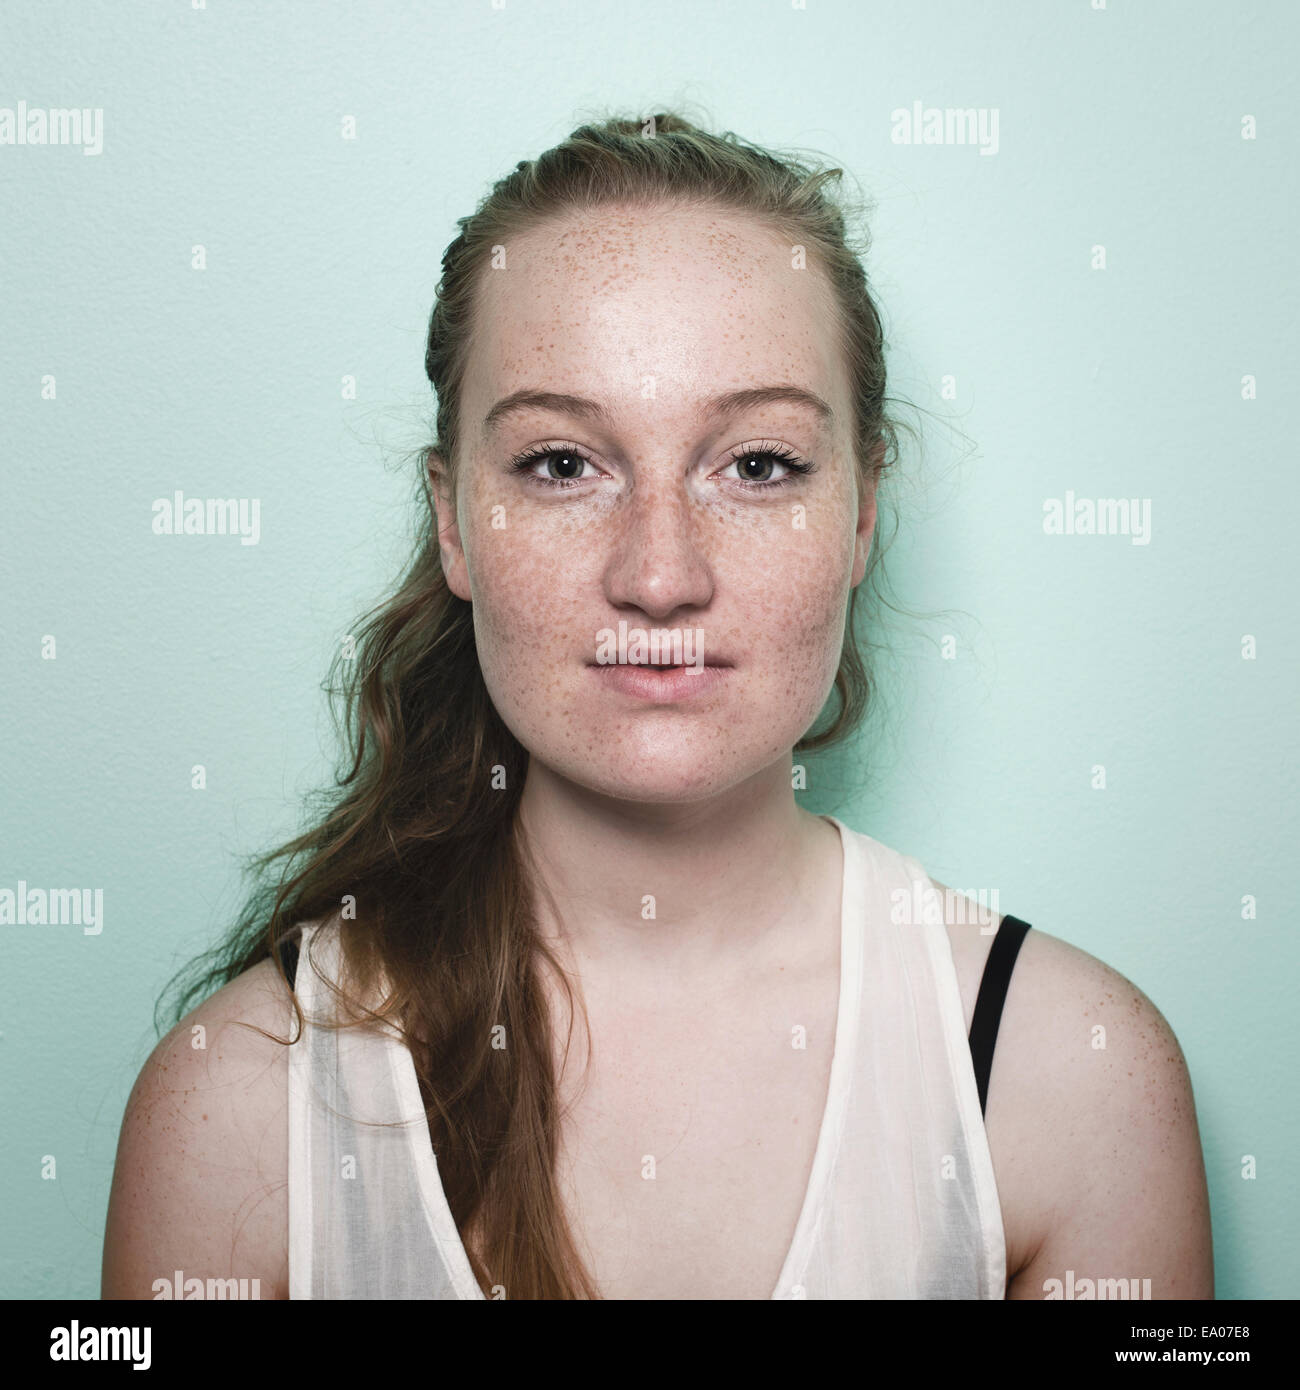 Portrait of young woman with freckles Stock Photo